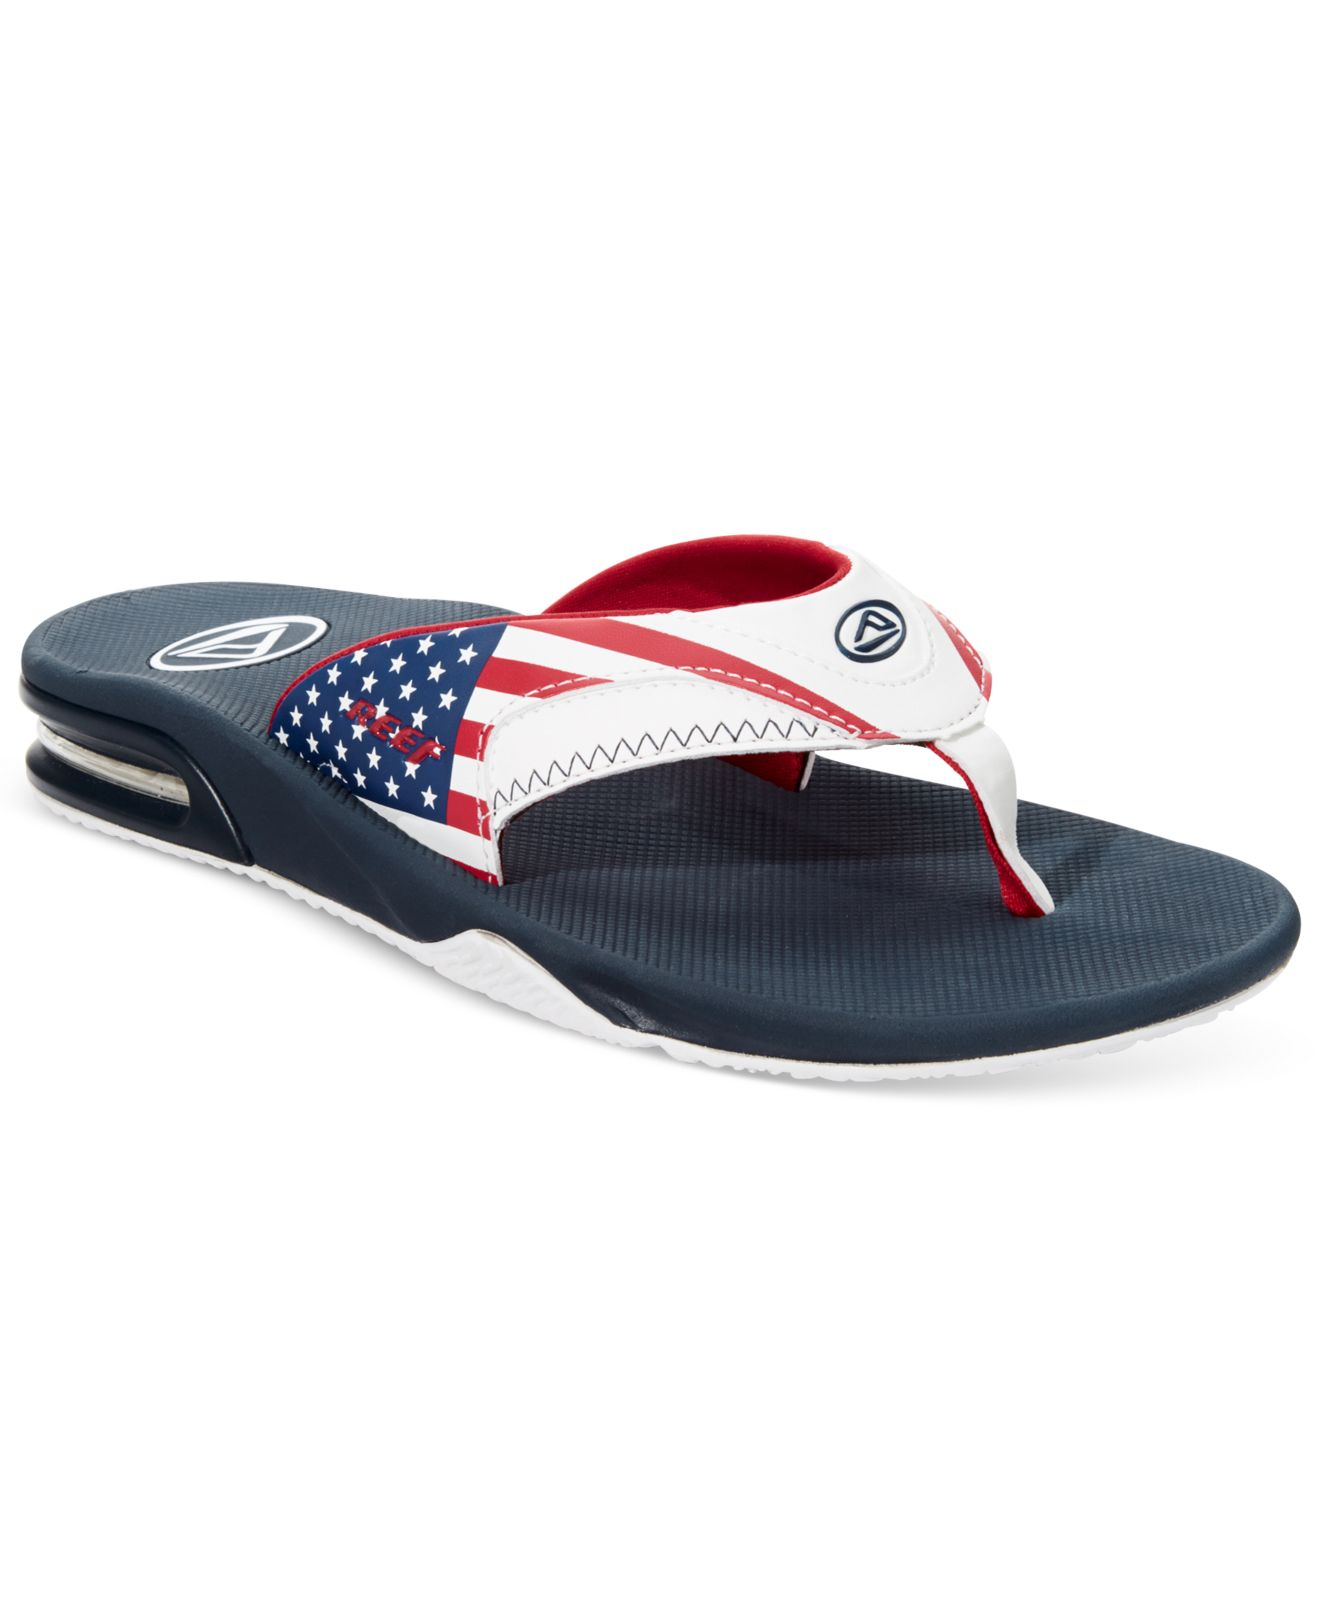 Reef American Flag Flip Flops Norway, SAVE 40% - aveclumiere.com